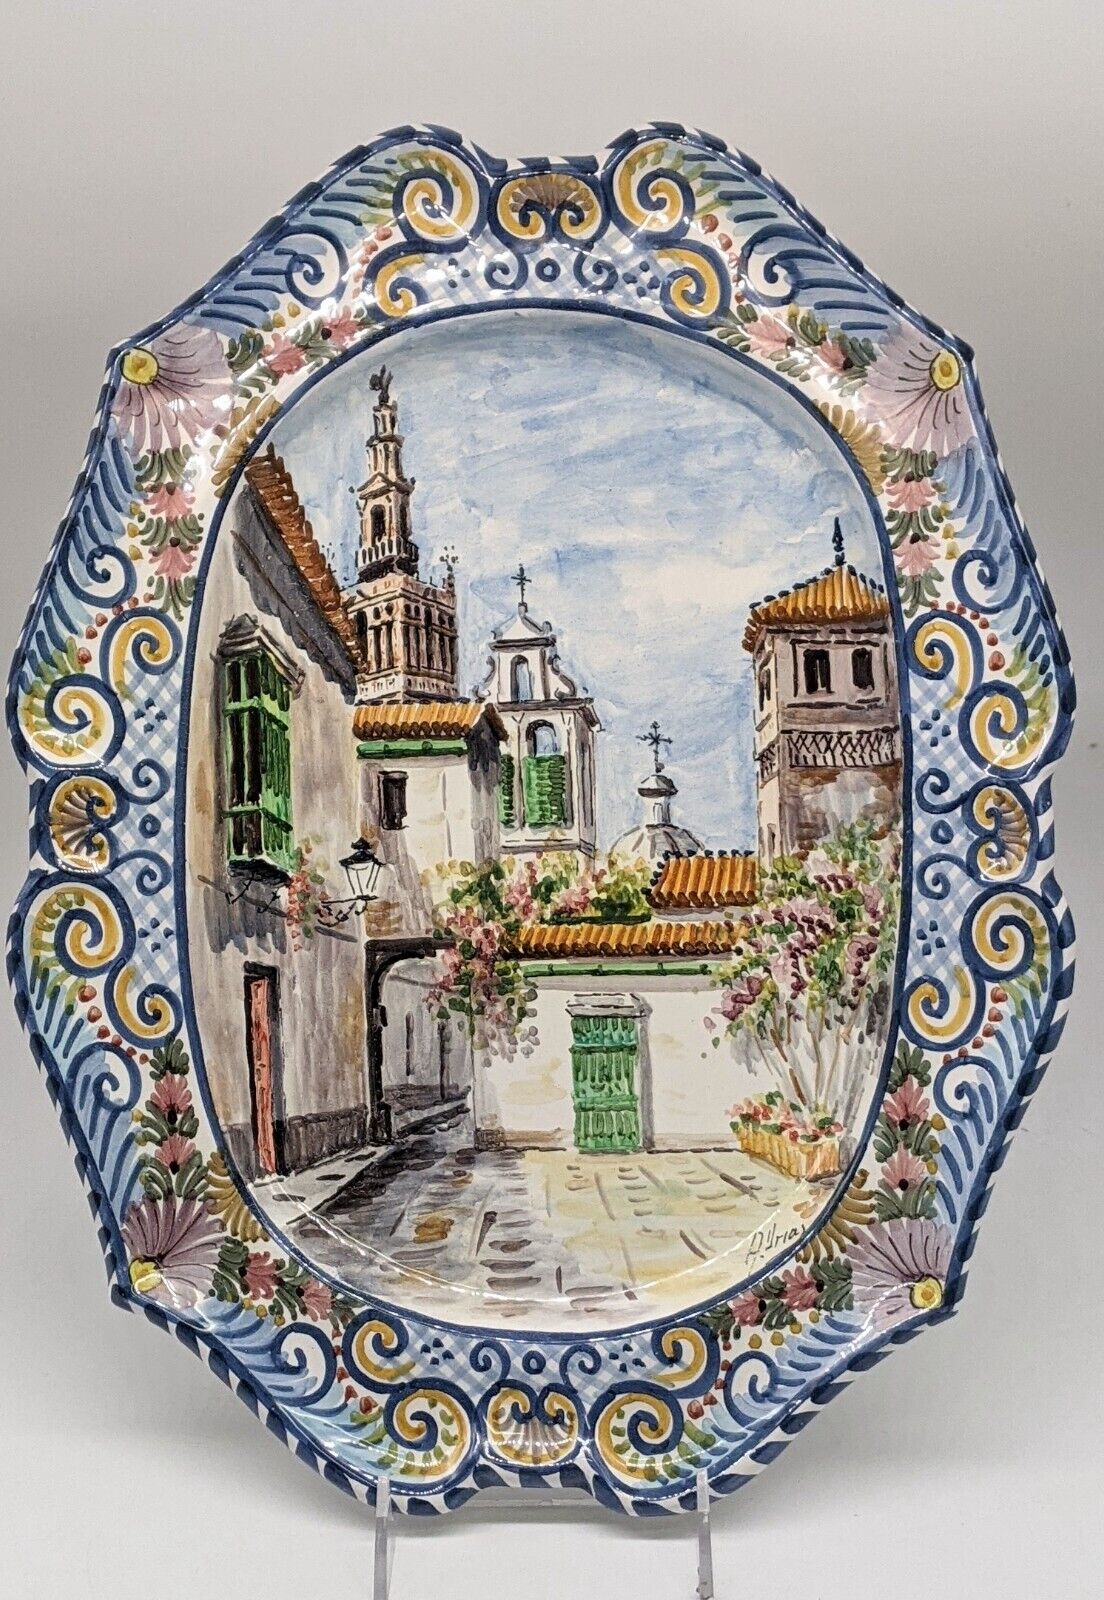 Spanish Majolica Seville Andalusia Spain Wall Plate City Sketch Art